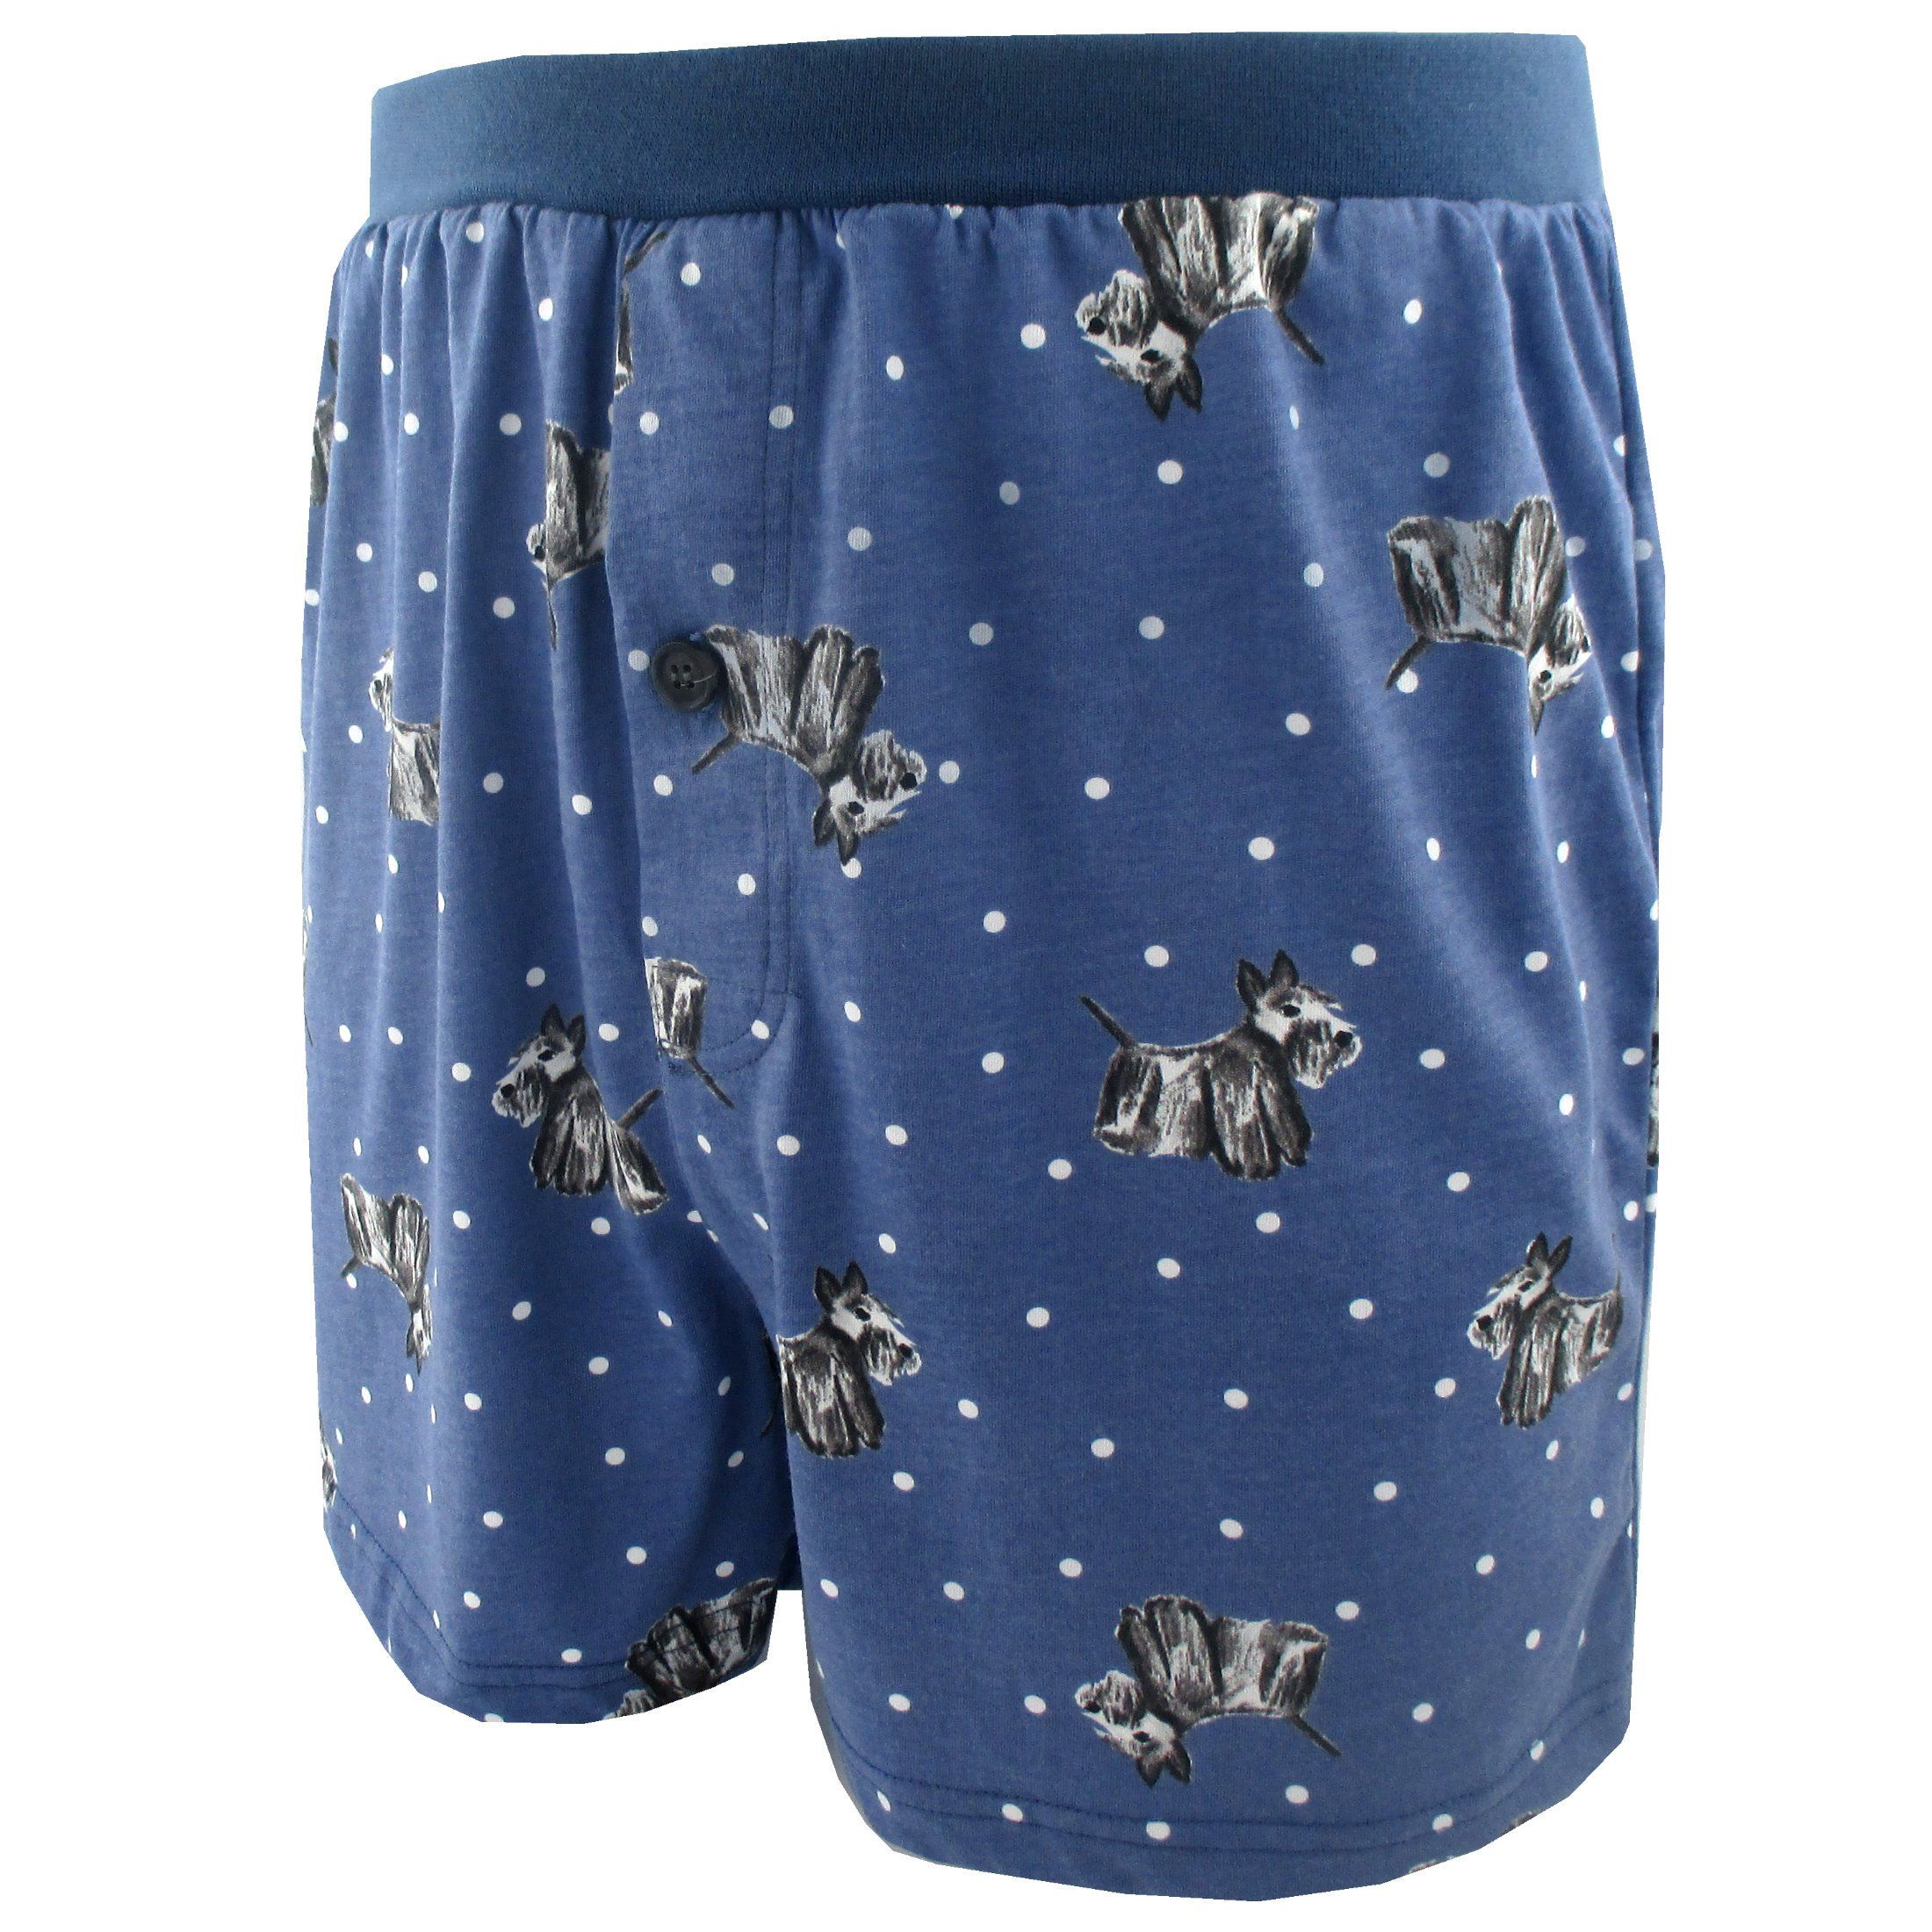 https://www.rockatoll.com/cdn/shop/products/rockatoll-loungewear-work-at-home-wear-boxer-shorts-with-scottish-terriers-all-over.jpg?v=1610616176&width=2200